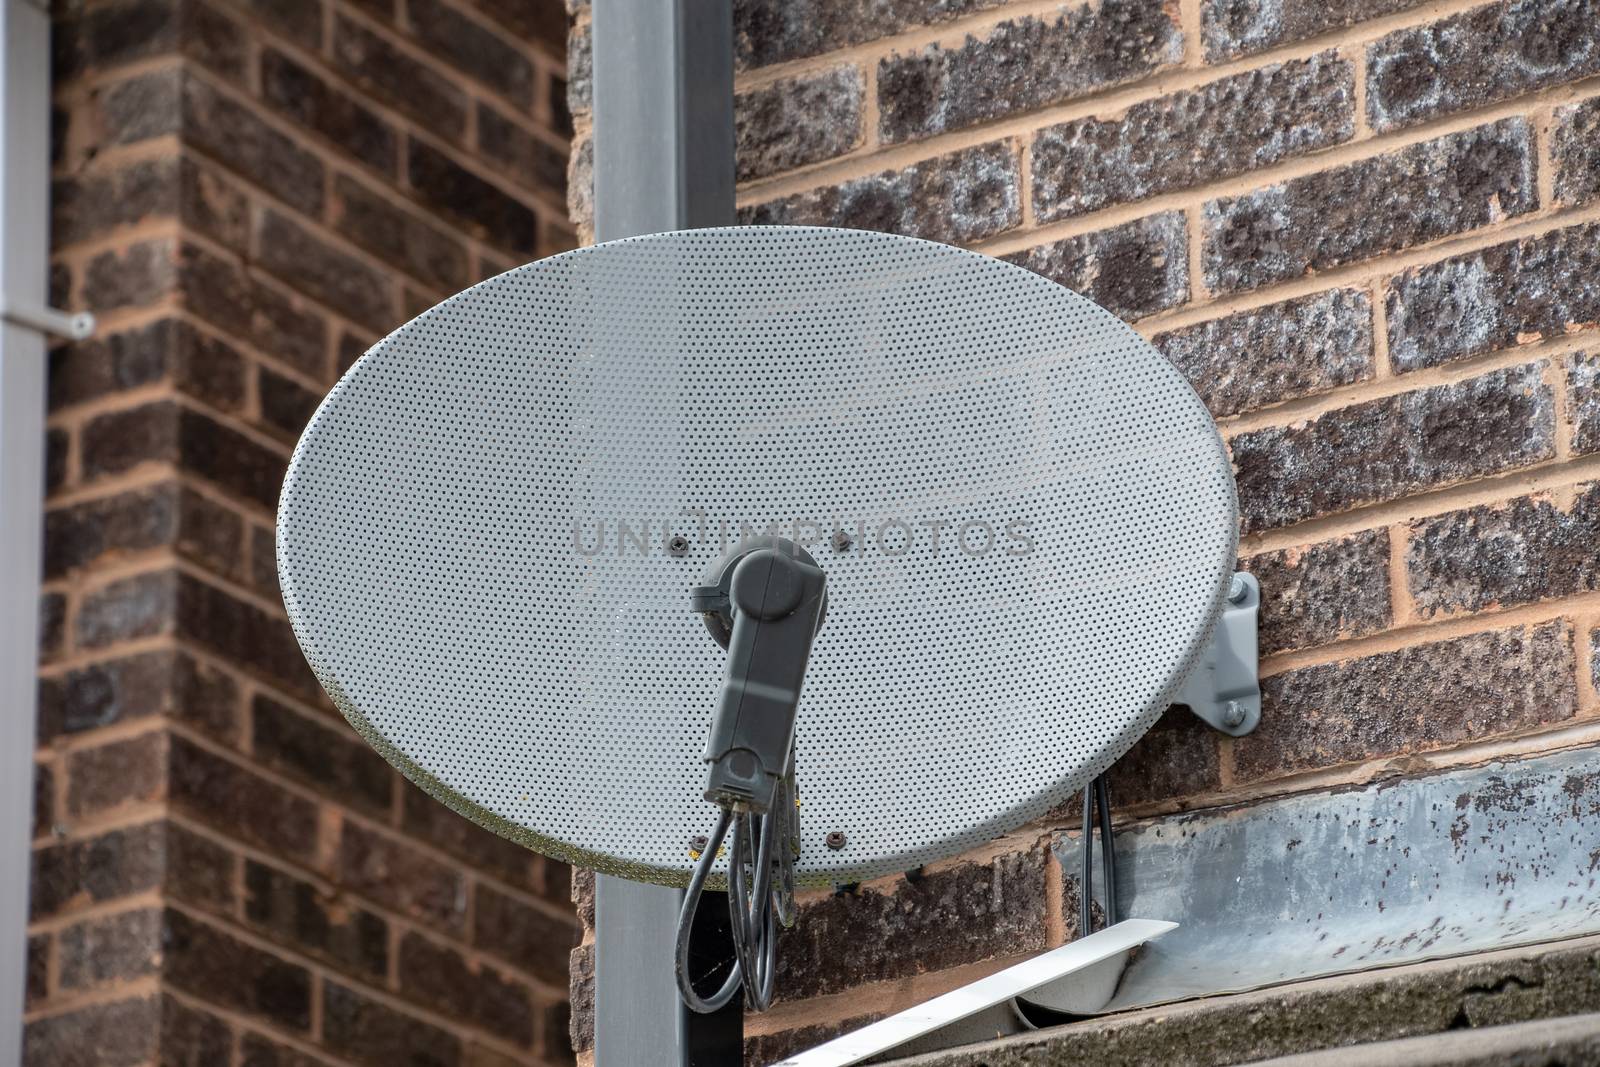 TV satellite disk mounted on a brick wall